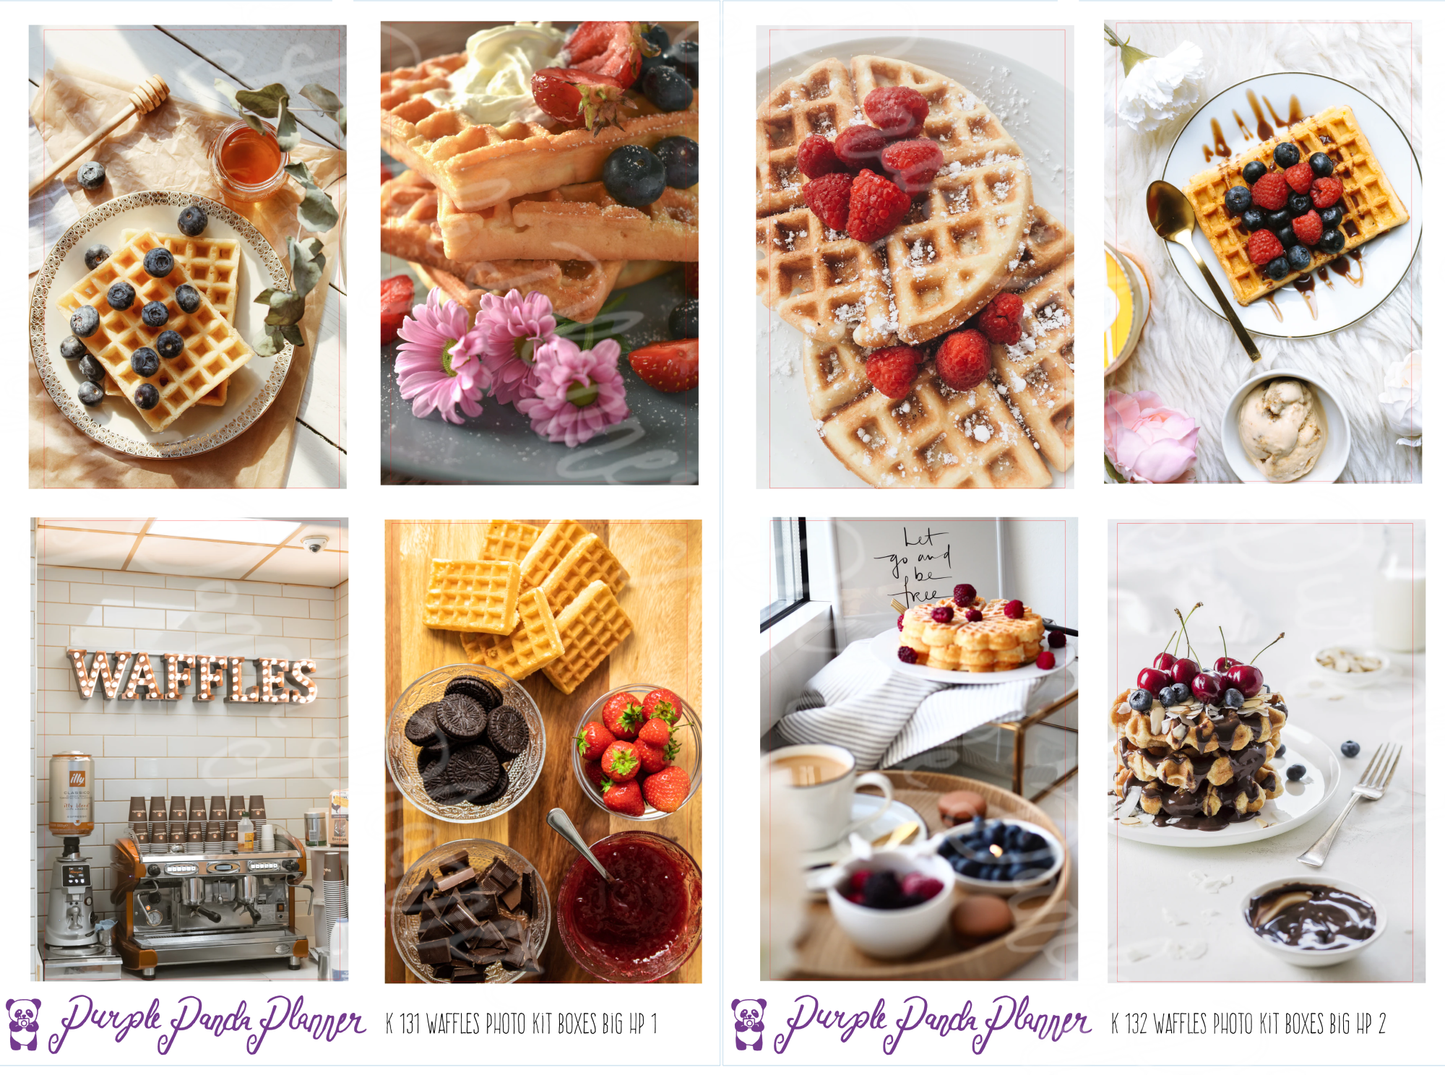 HP Big - Waffles Weekly Photo Kit for Planner or Bullet Journal, Functional Stickers